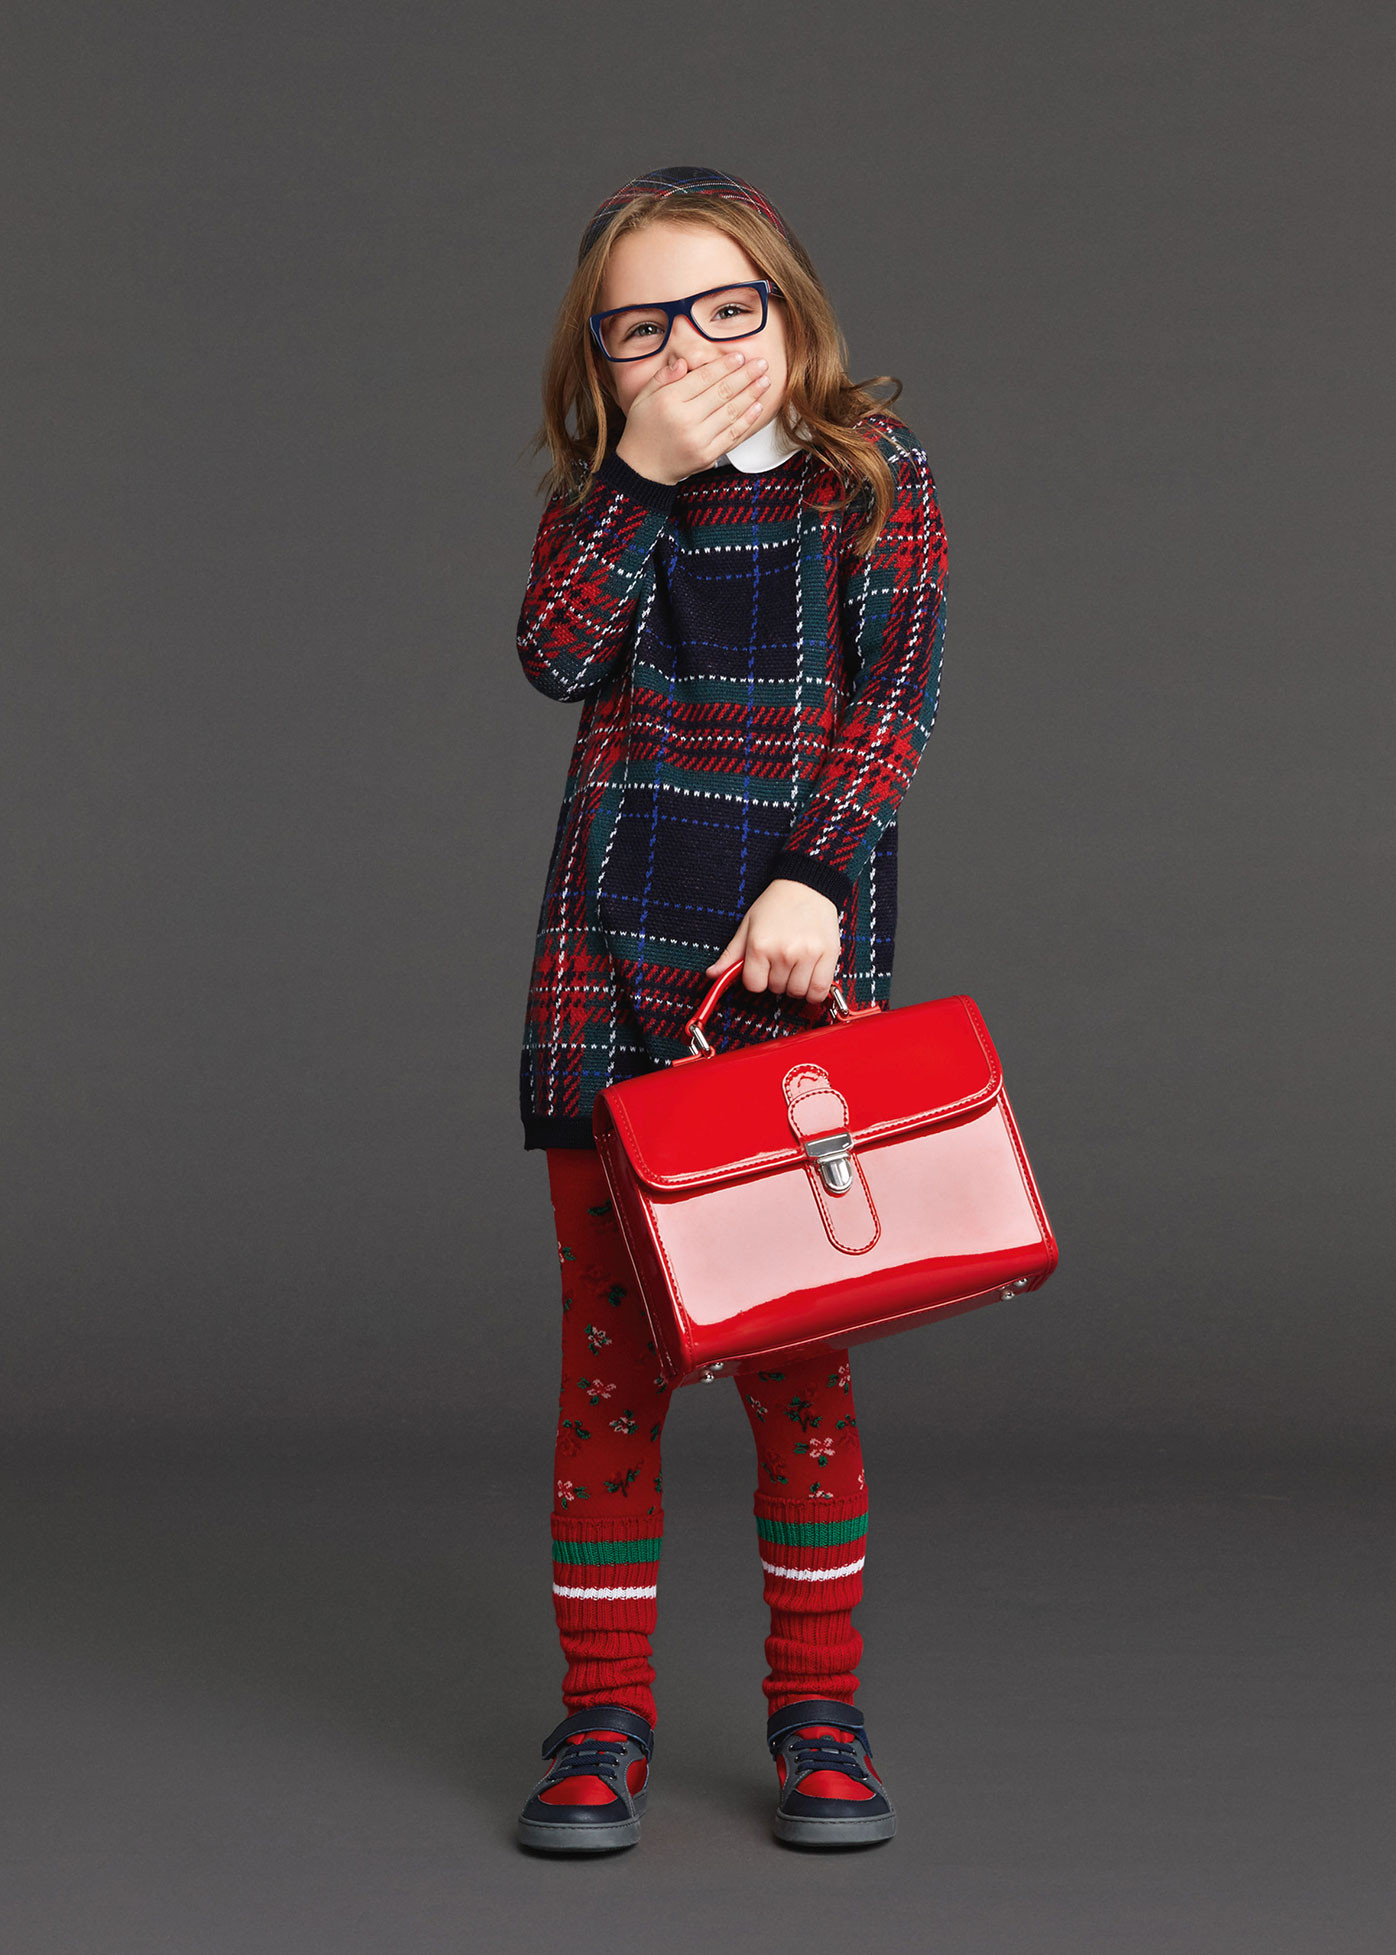 Fashion Clothing For Kids
 Back To School Dolce & Gabbana Winter 2016 Kids Clothes